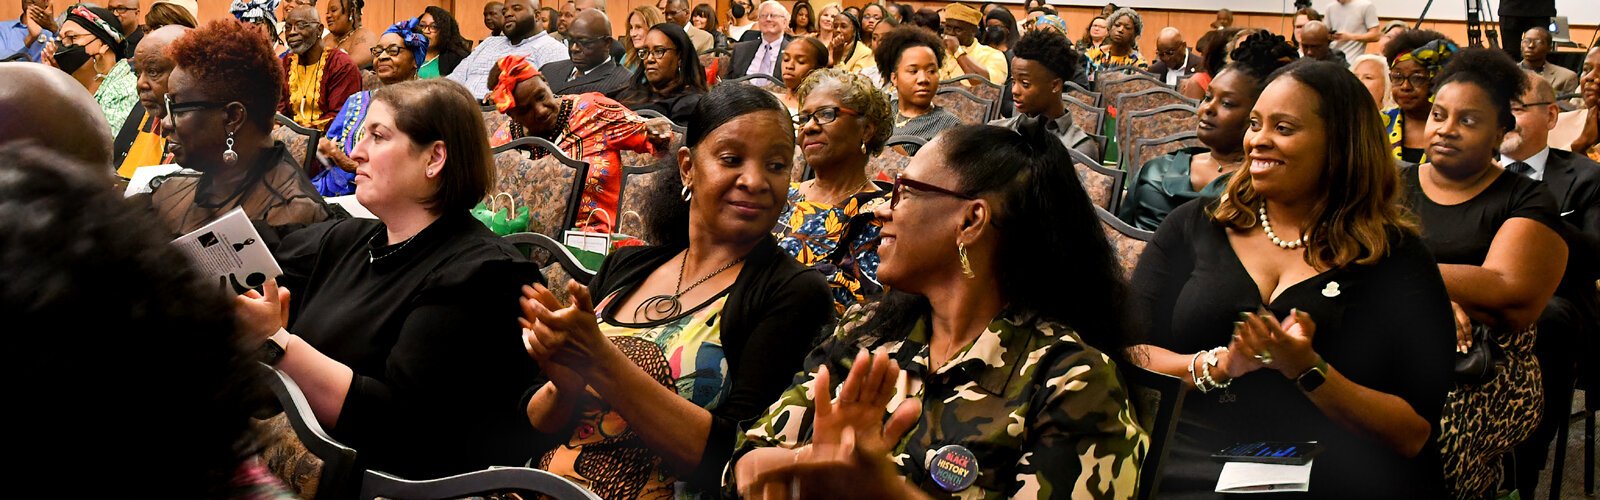 The TBHC Black History Month Reception, held after a month of special programming, was a sold-out event well appreciated by the African-American community of Tampa Bay.